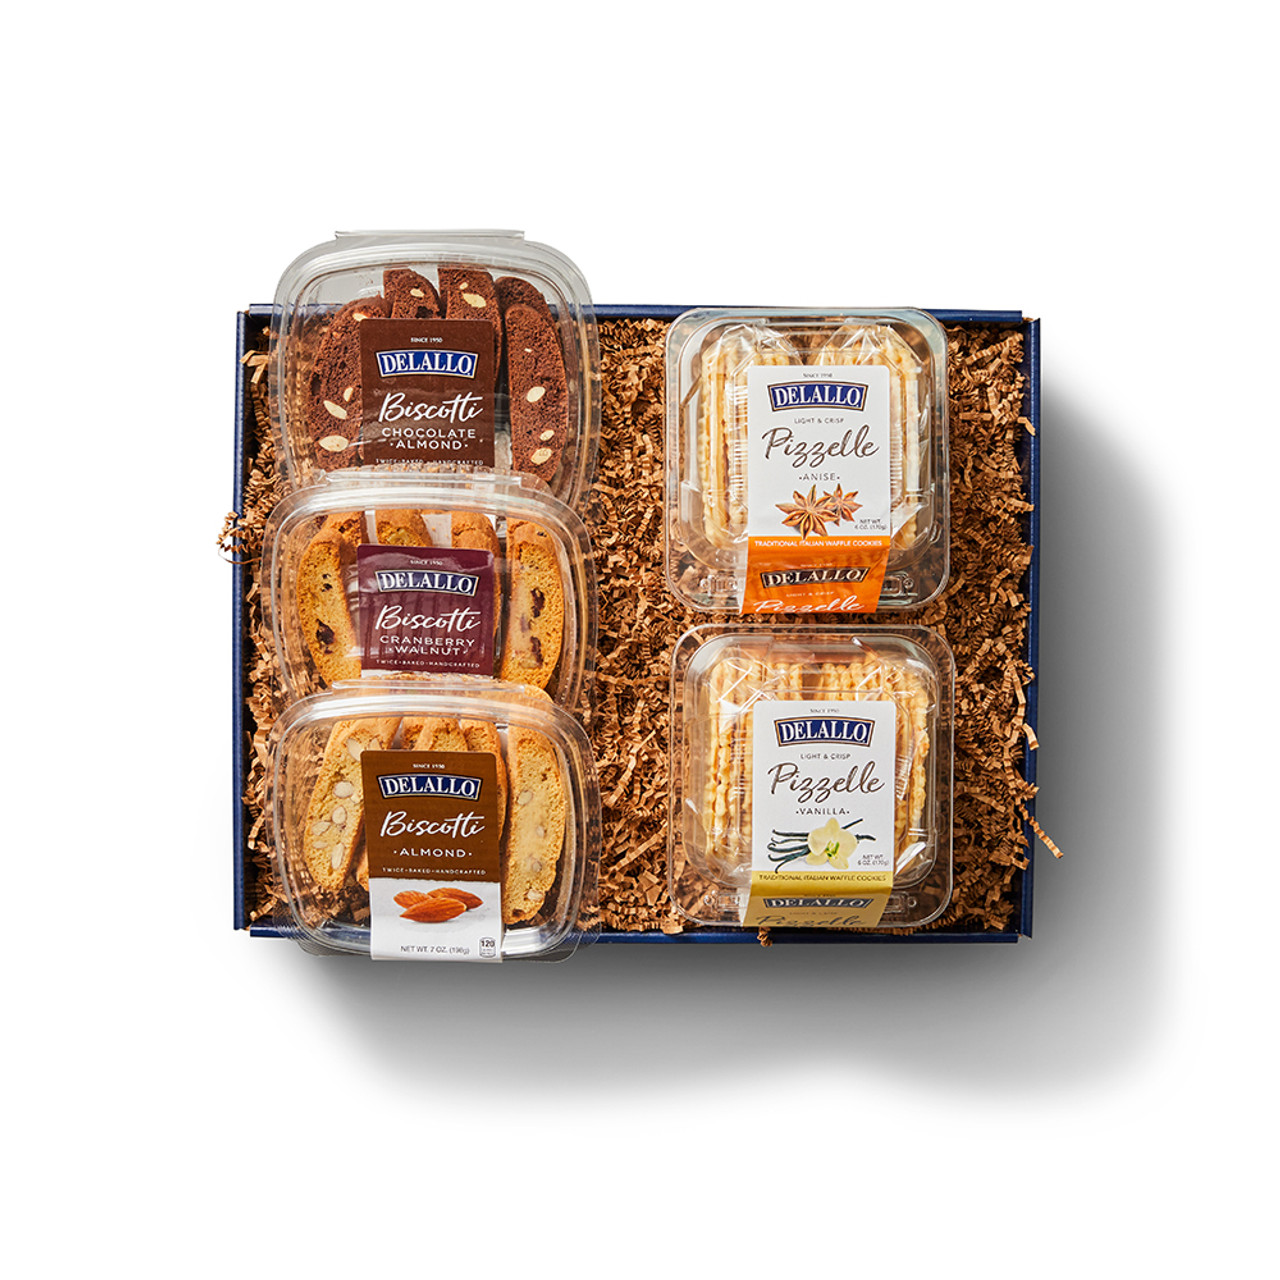 Best Biscotti and Pizzelle Gift Box